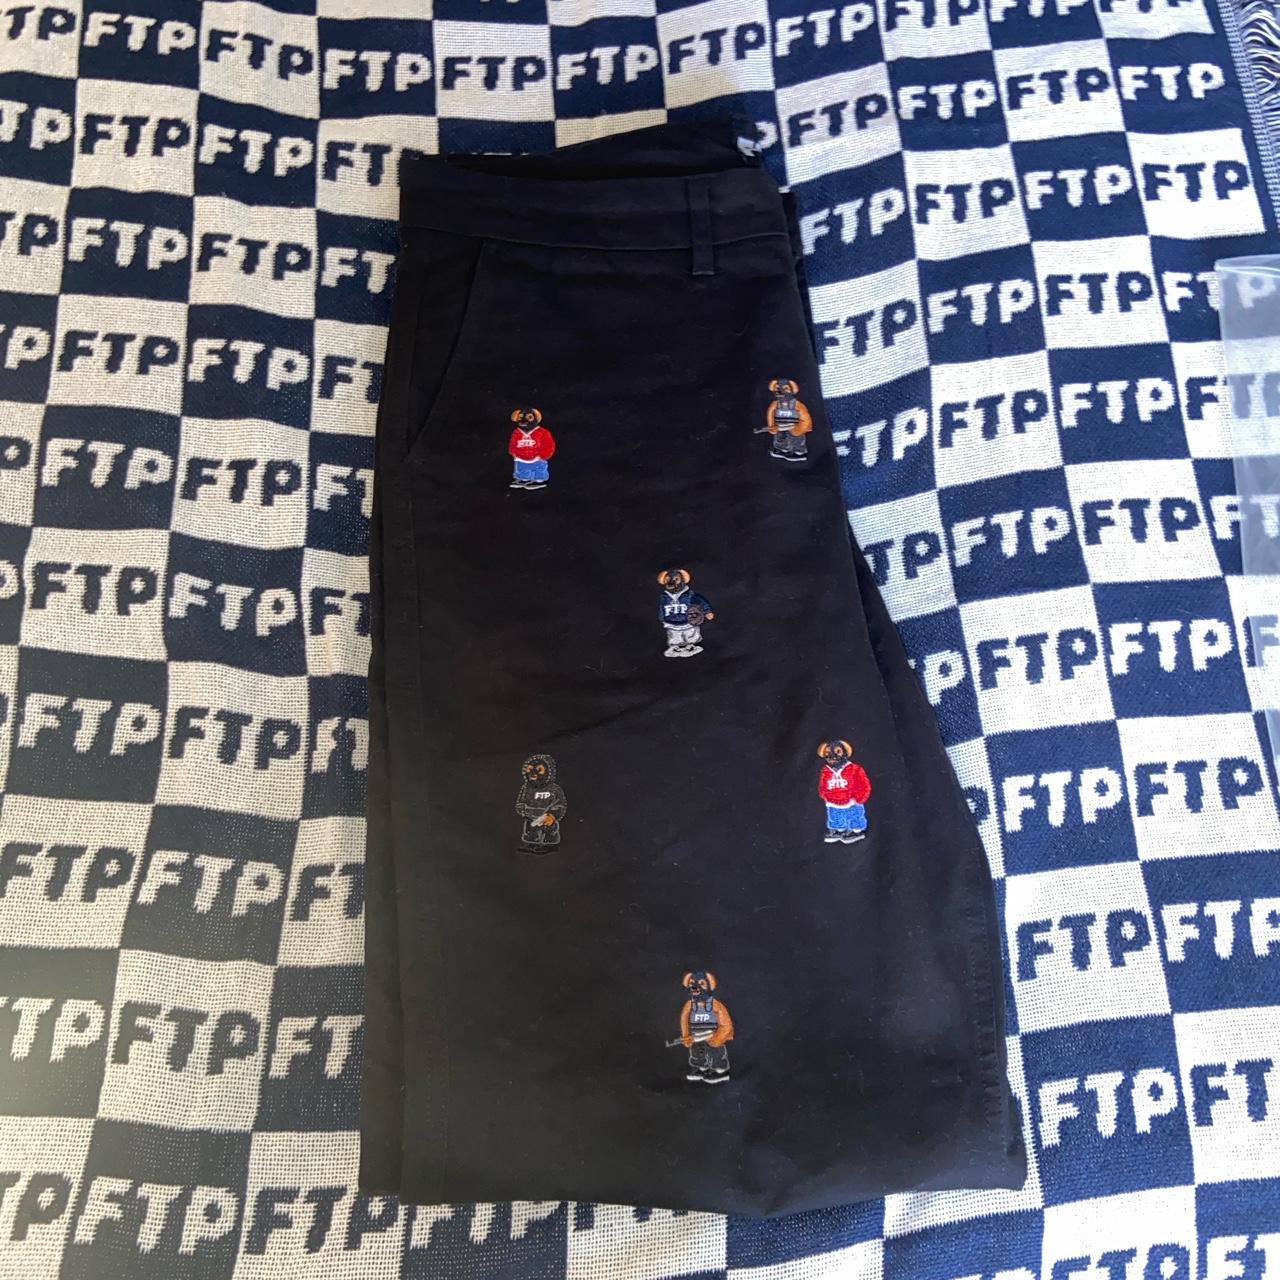 FTP Bear Chino Pants Size 34 DS #FTP - Depop